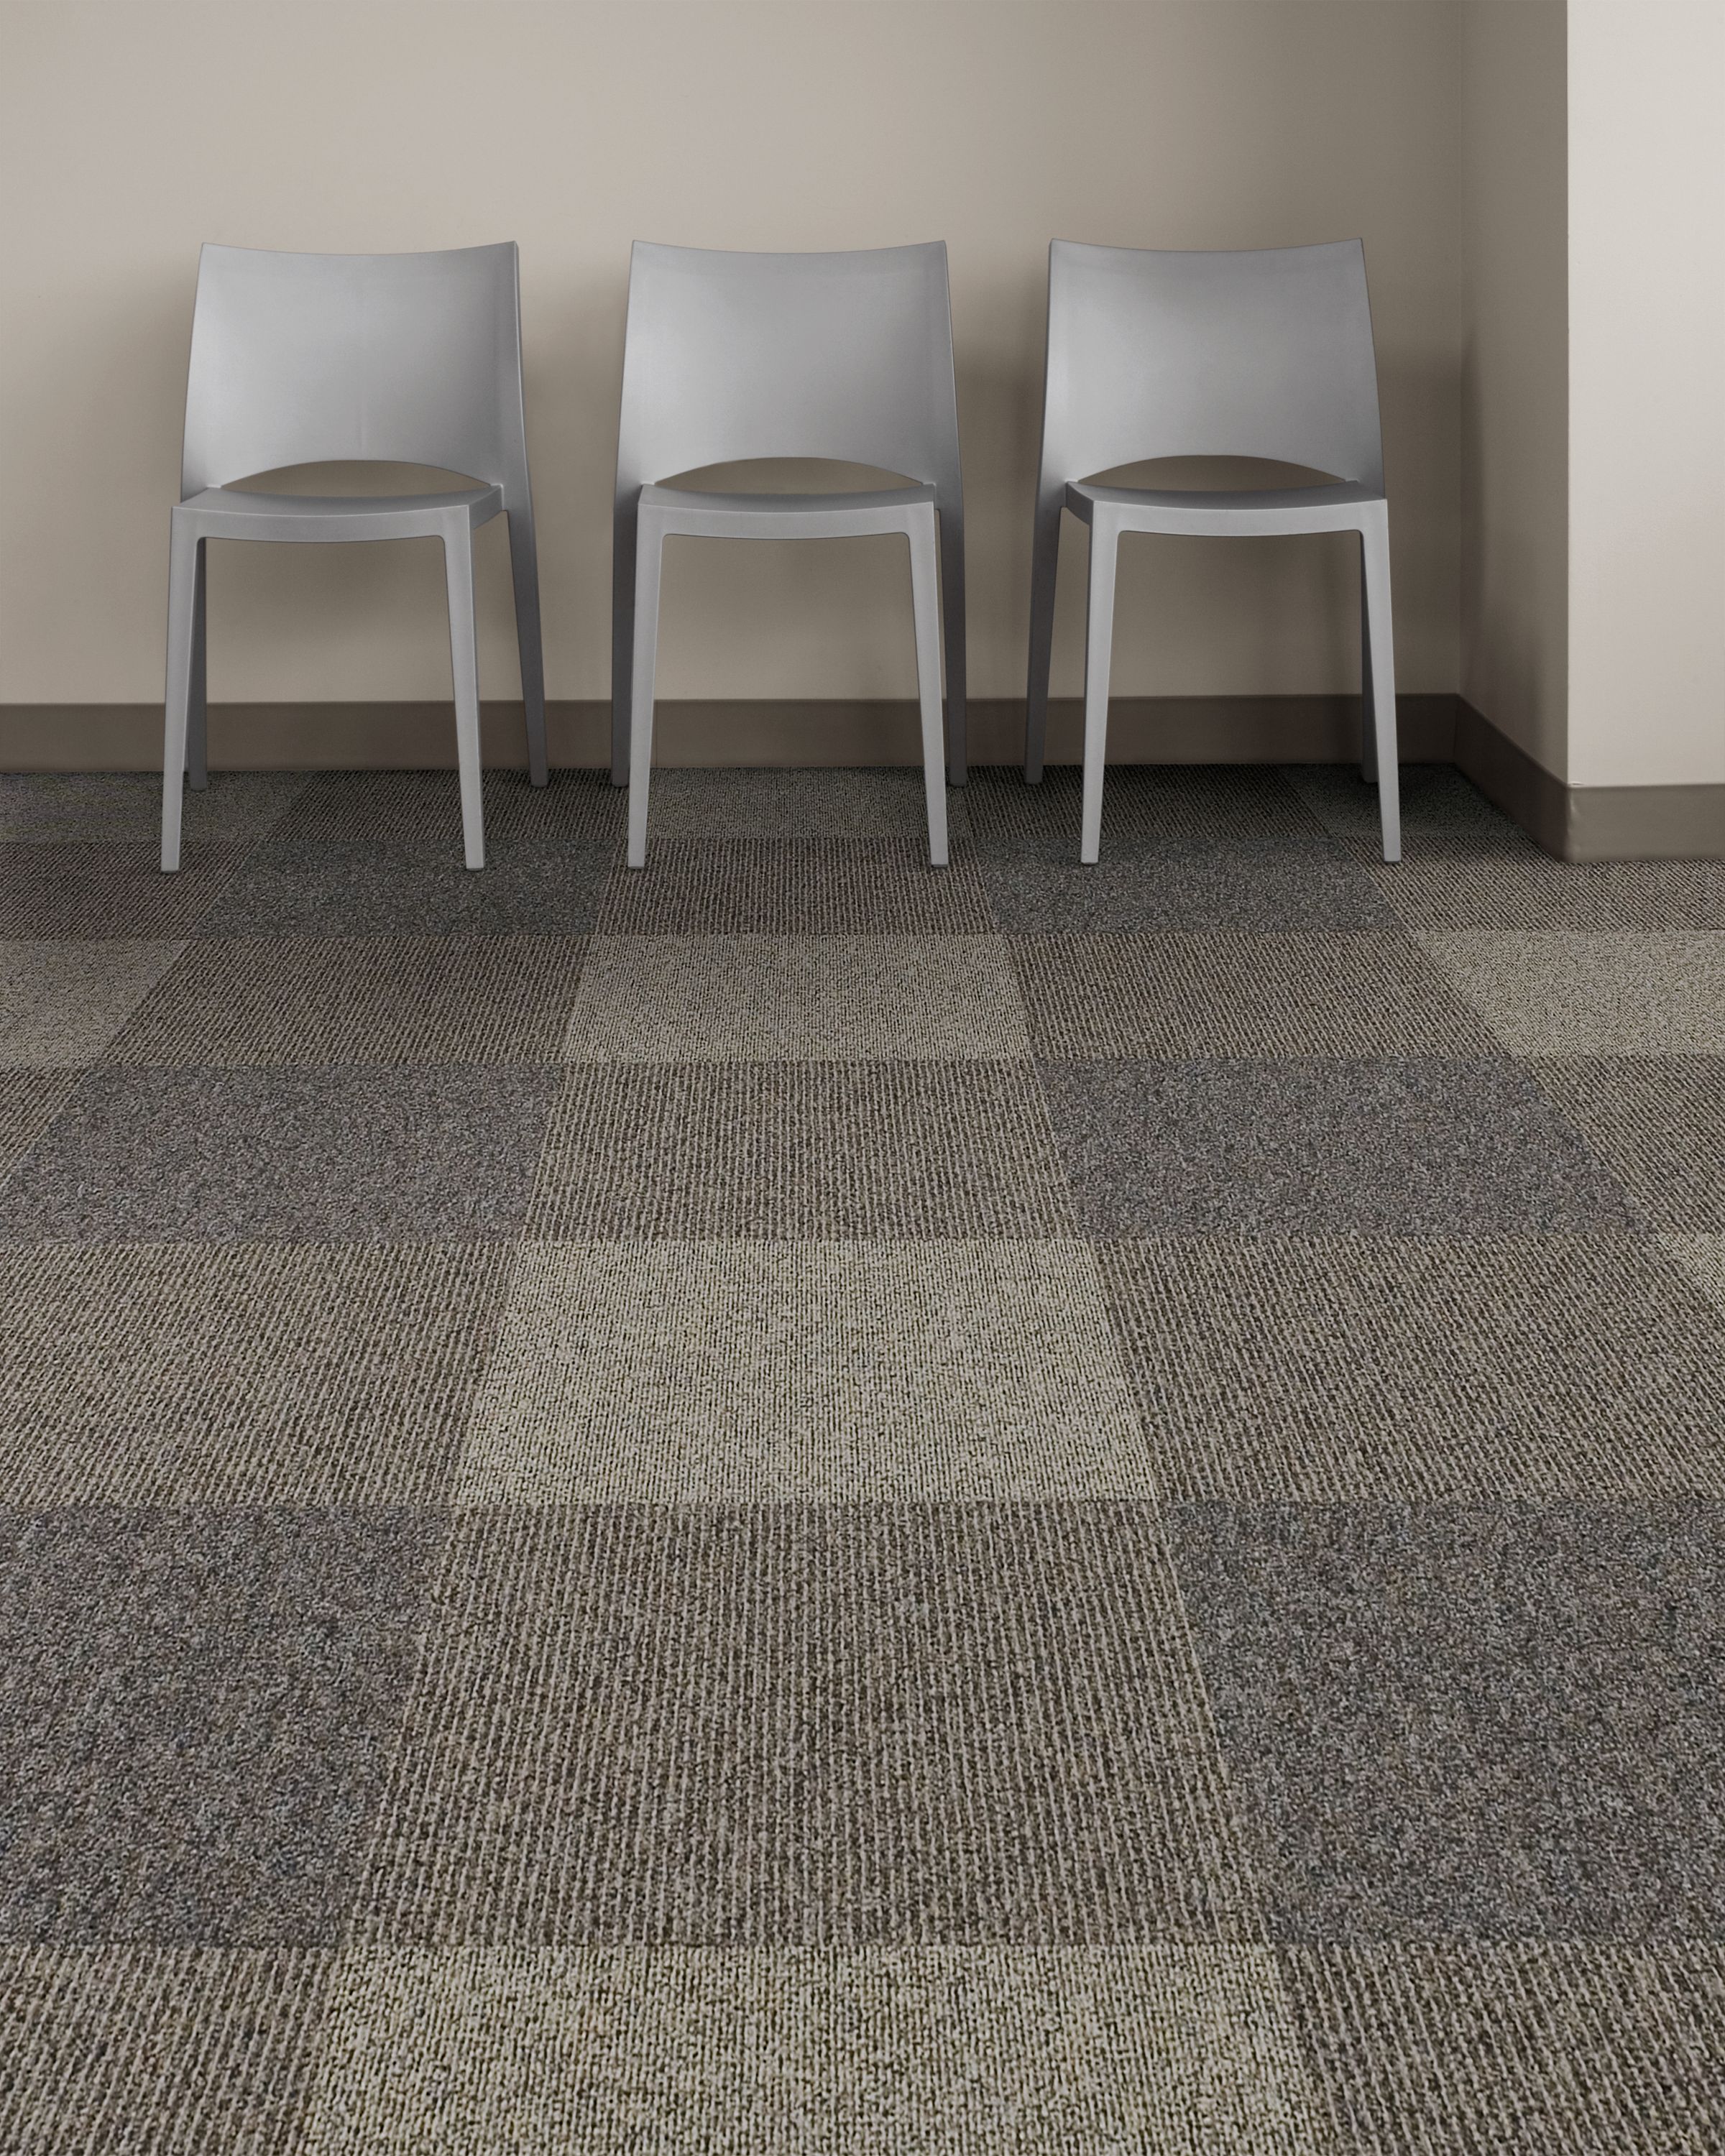 Interface Broomed, Grooved and Brushed carpet tile in room with three chairs numéro d’image 5